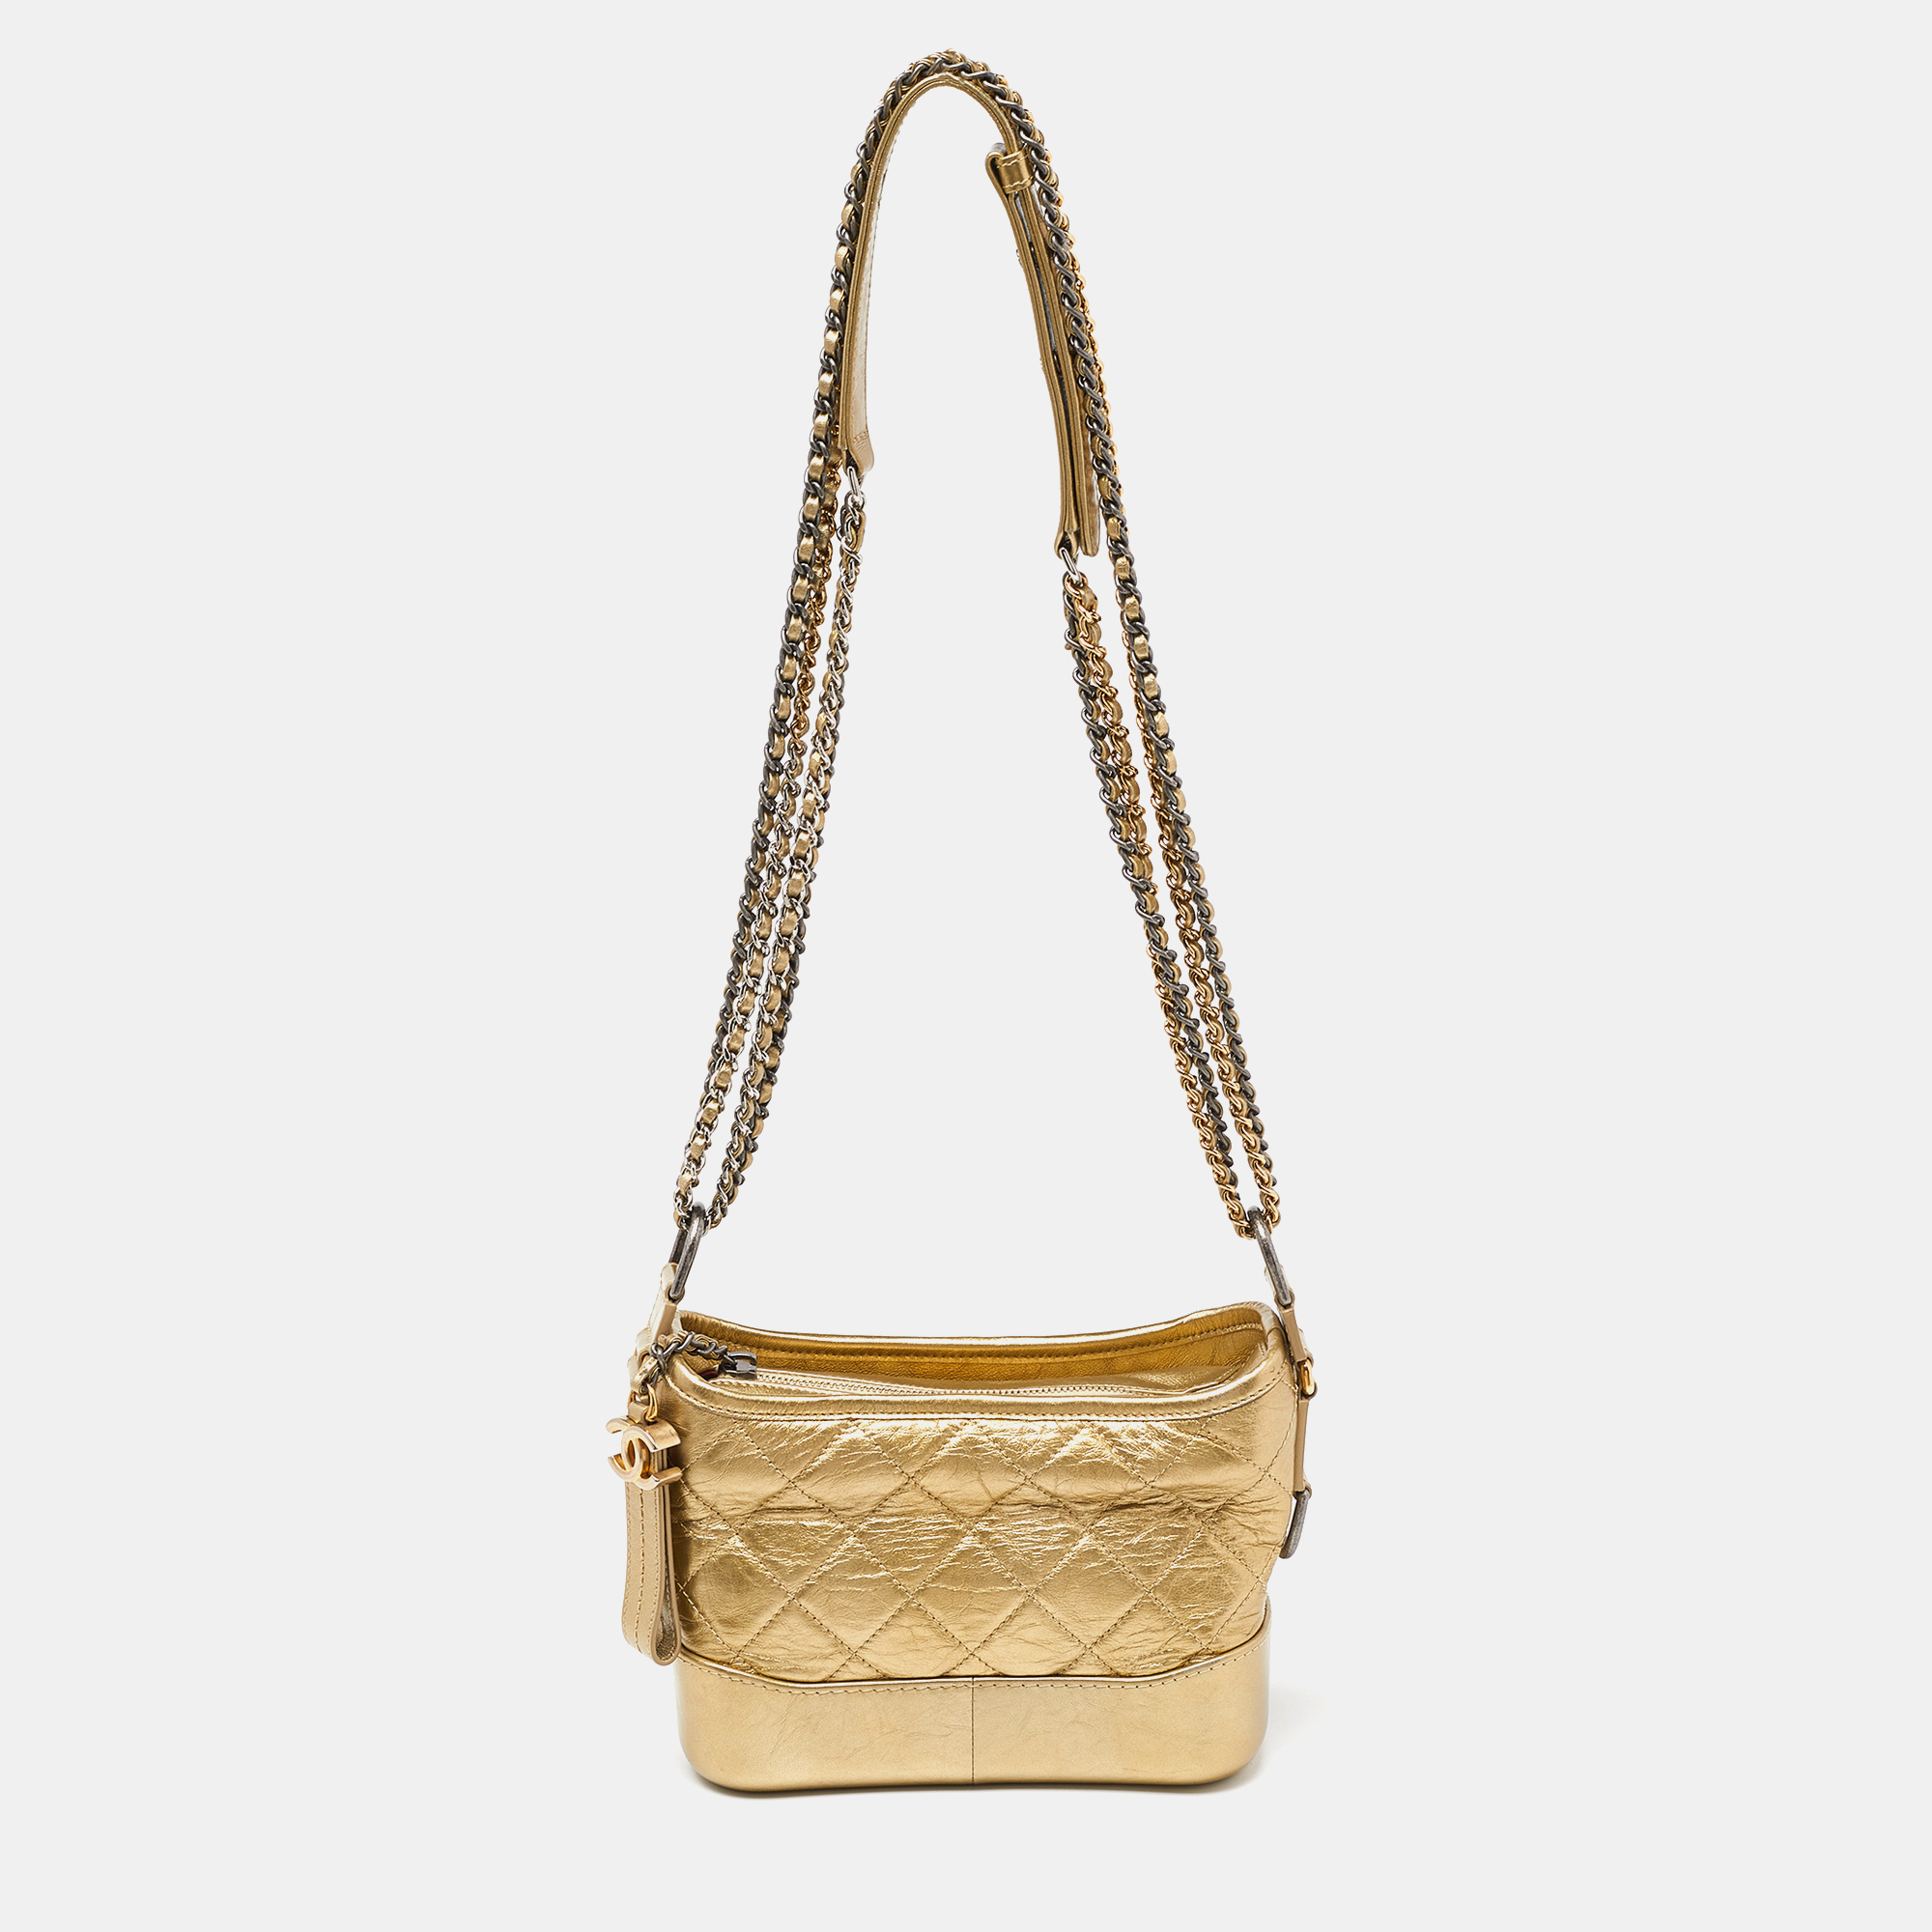 Chanel gold quilted aged leather small gabrielle hobo